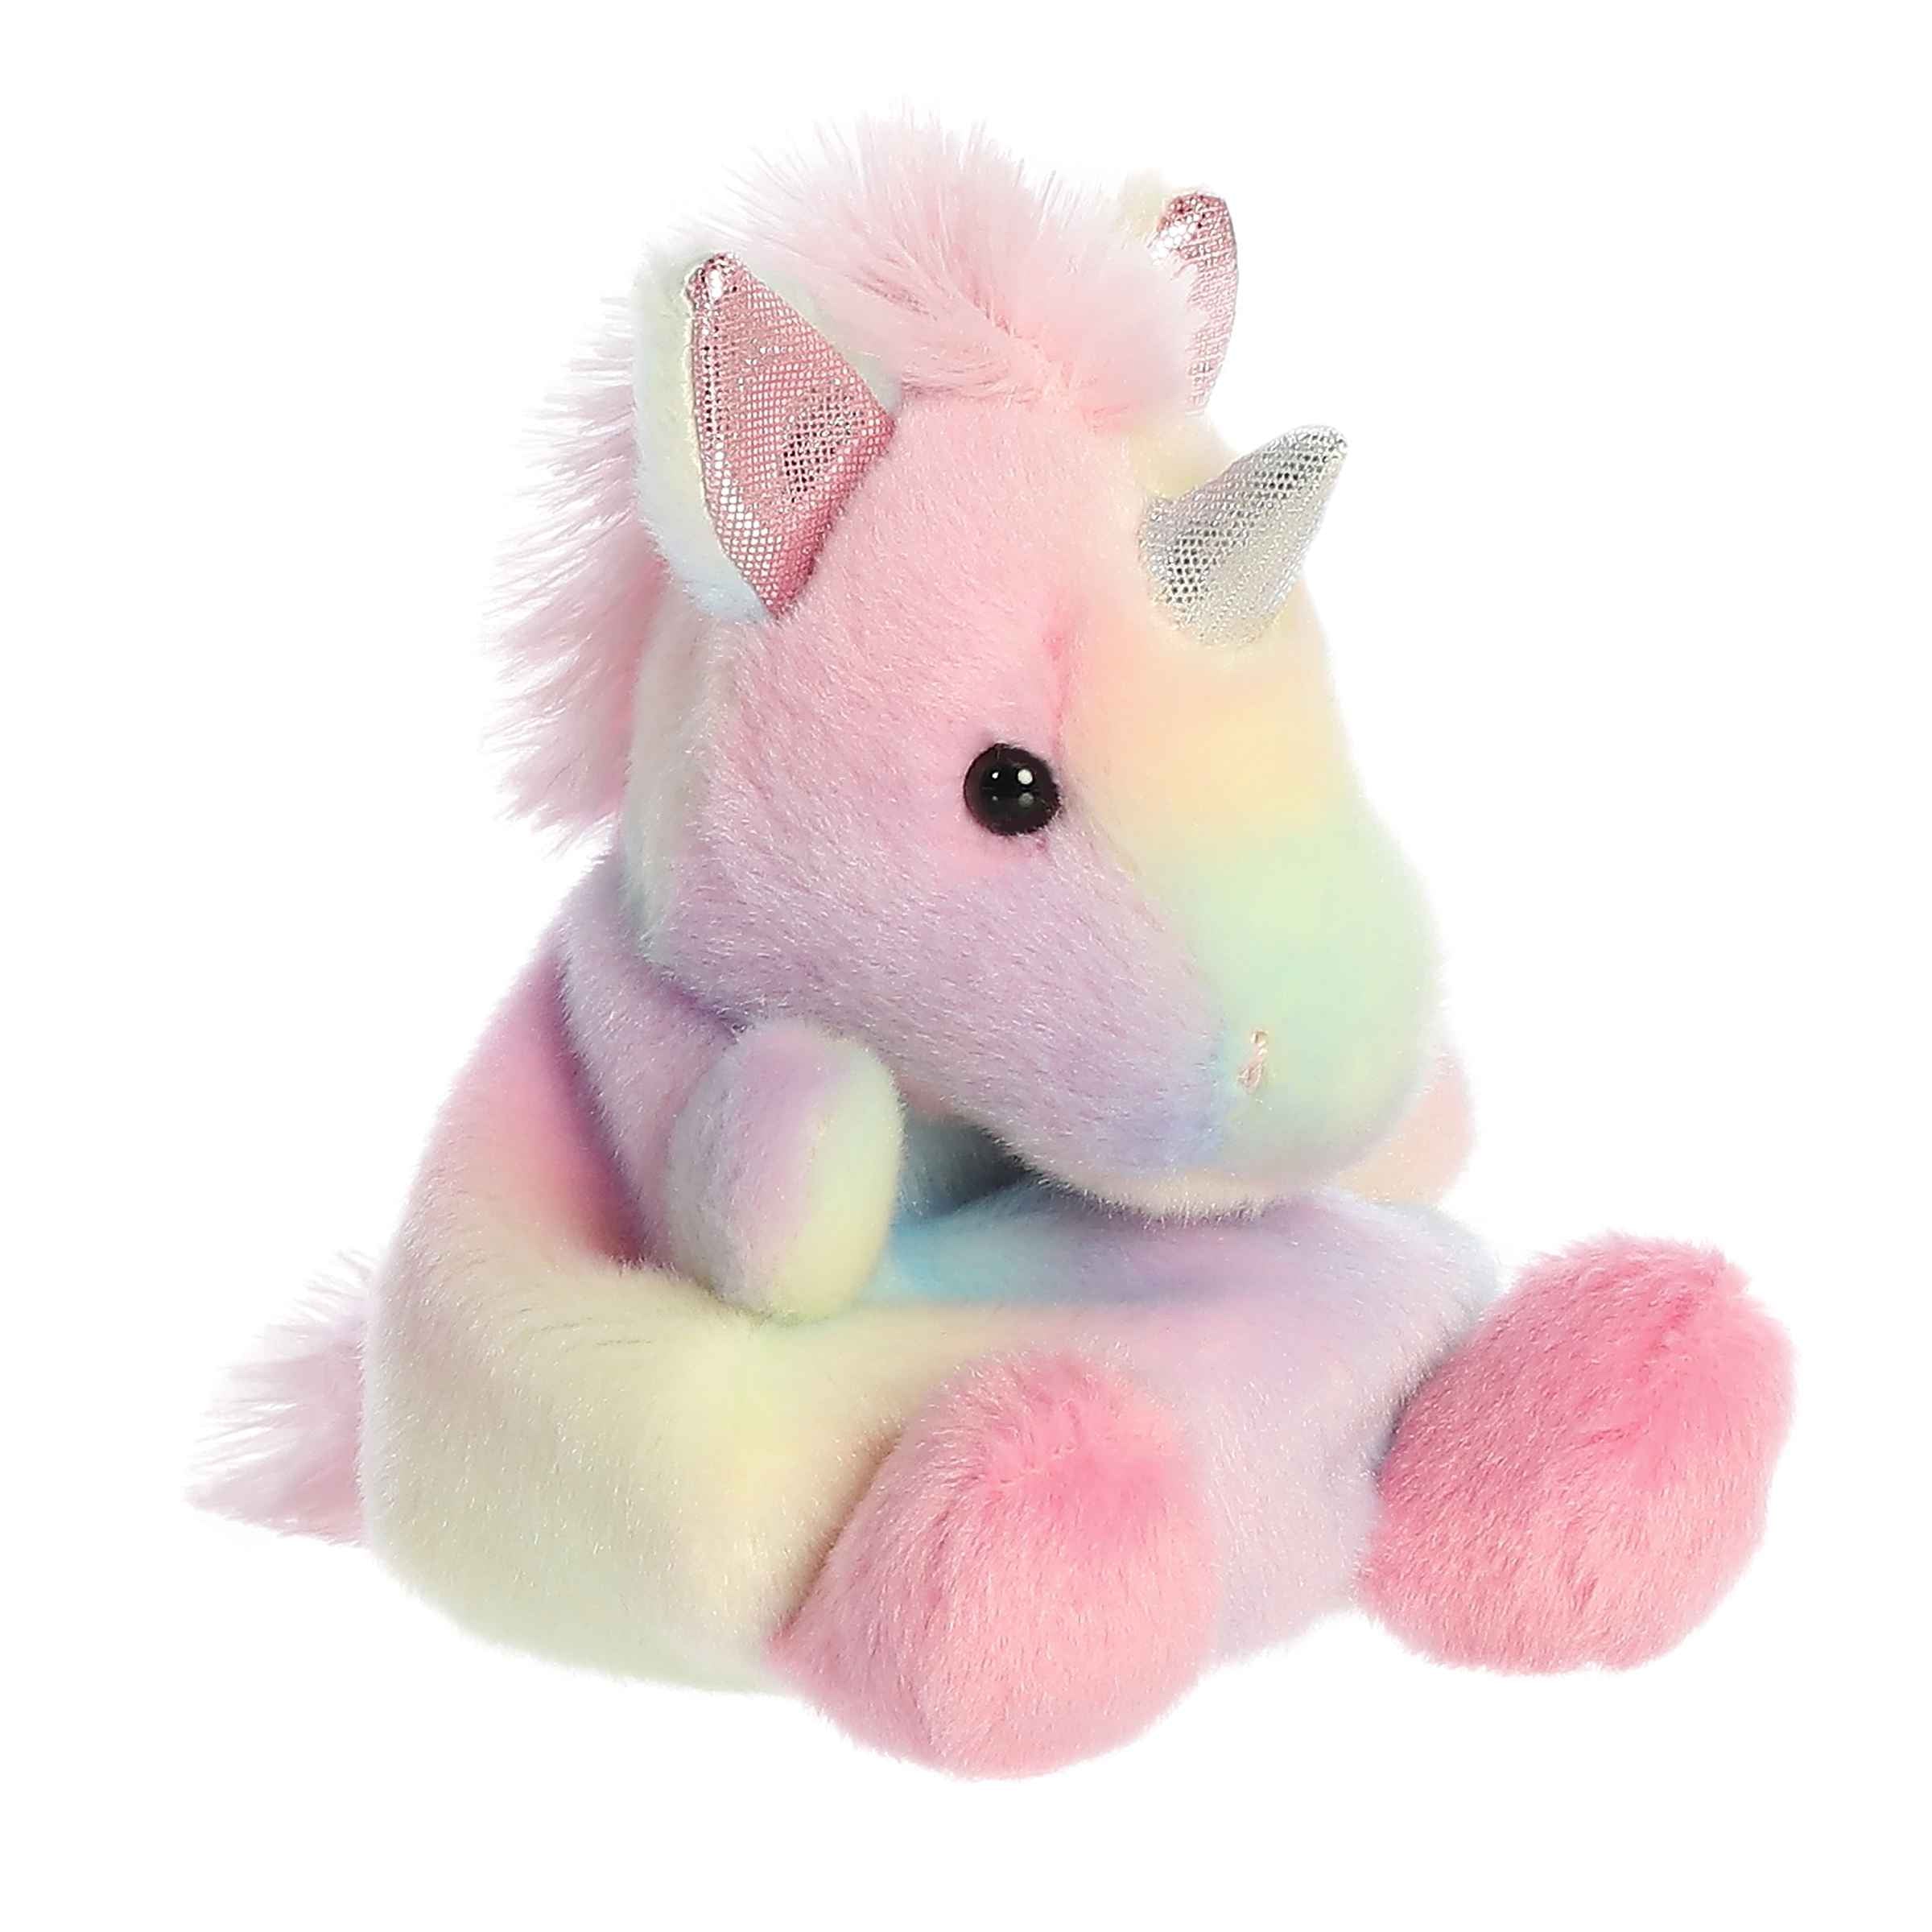 Sorbet Unicorn plush from Palm Pals, pastel swirl coat, sparkled horn, magical